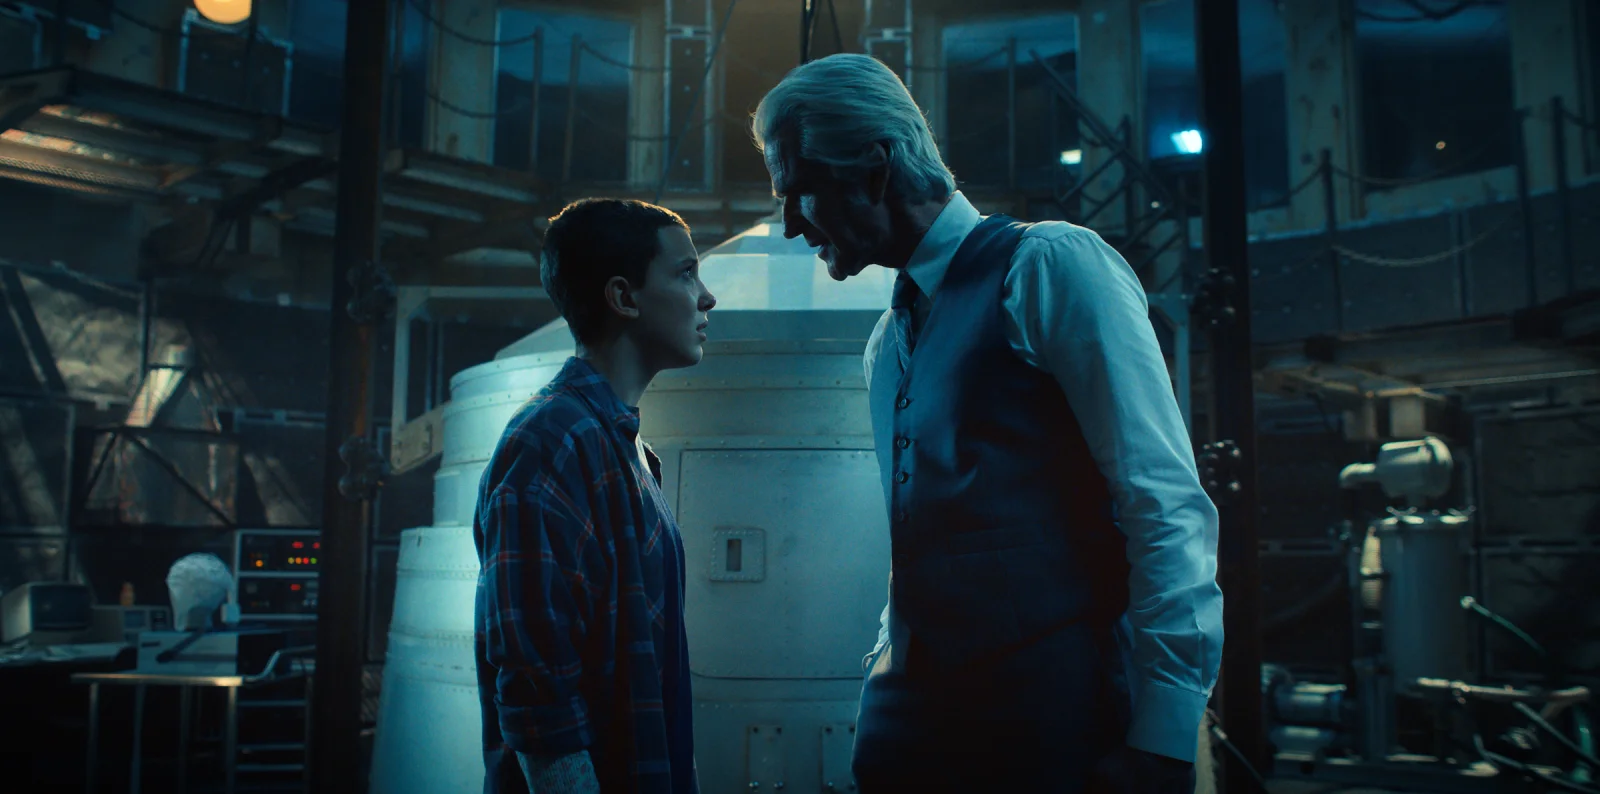 eleven and brenner argue about what to do in their secret lab